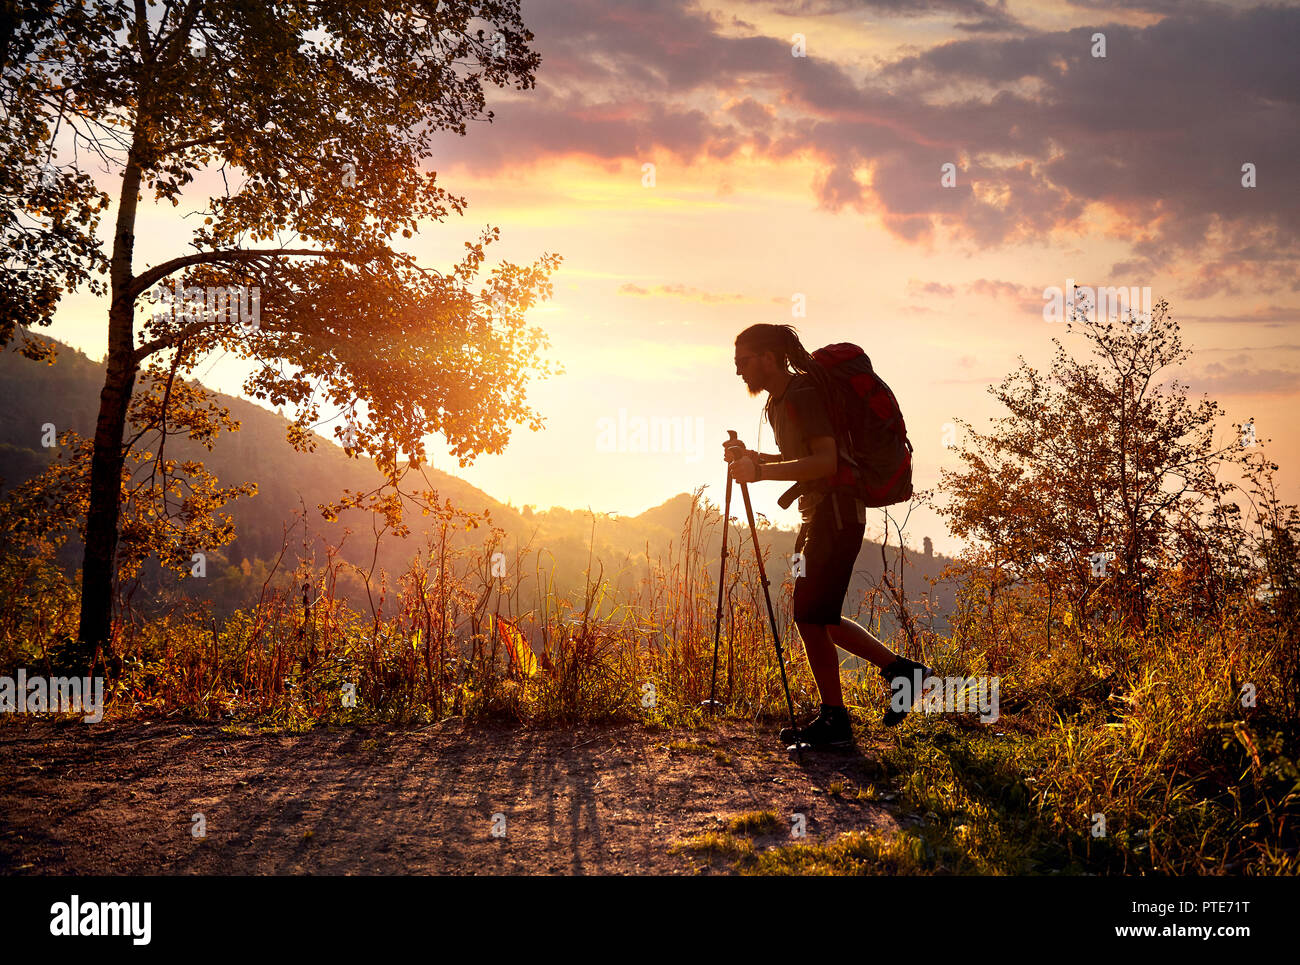 Man with dreadlocks and backpack in silhouette hike in mountains at sunset orange sky background Stock Photo